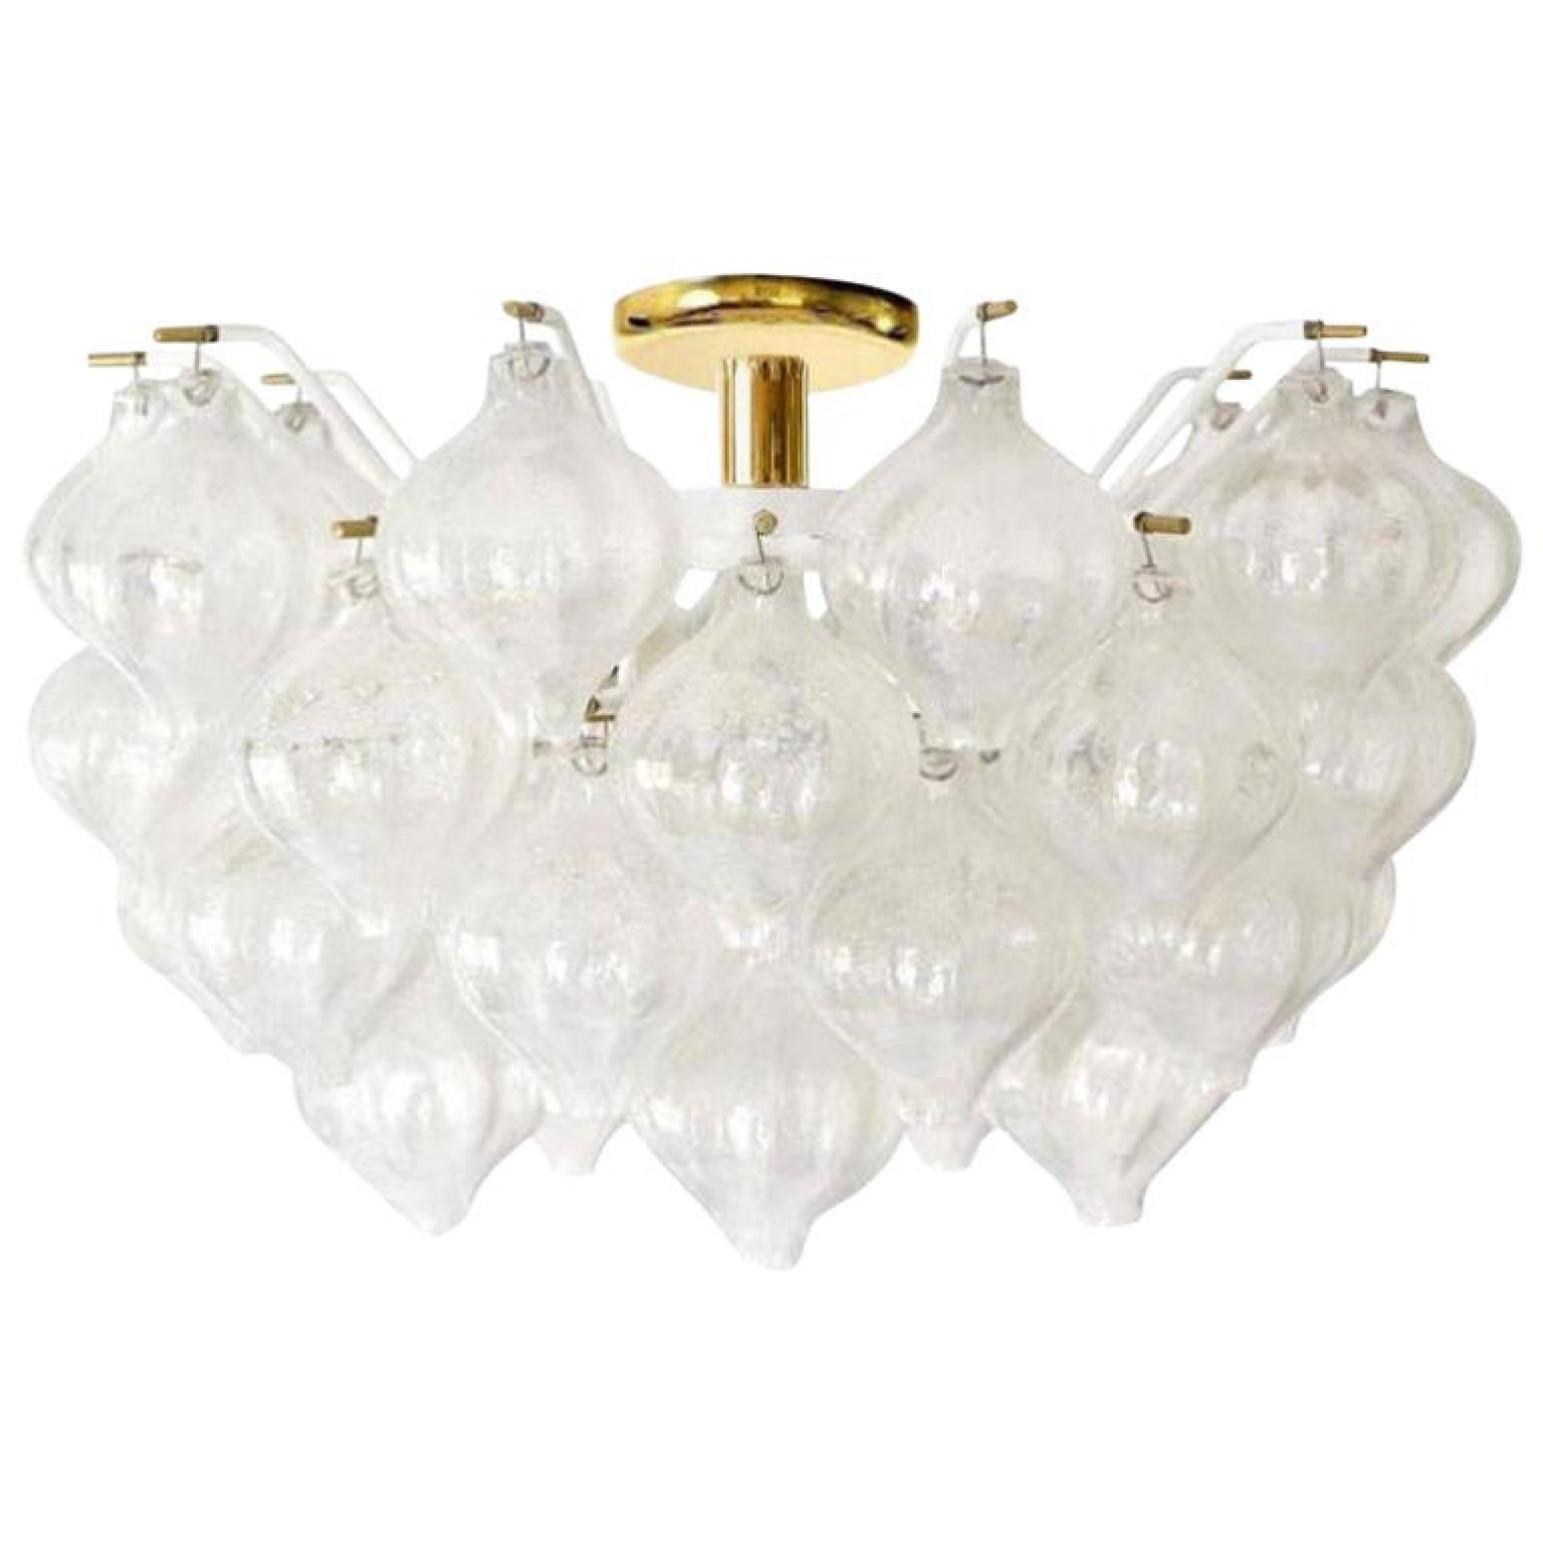 An exceptional 'Tulipan' flushmount chandelier by J.T. Kalmar, Austria, Vienna, manufactured in the midcentury, circa 1970 (late 1960s-early 1970s). With beautiful Murano Tulipan shaped hand blown bubble glasses. Several glasses are mounted with